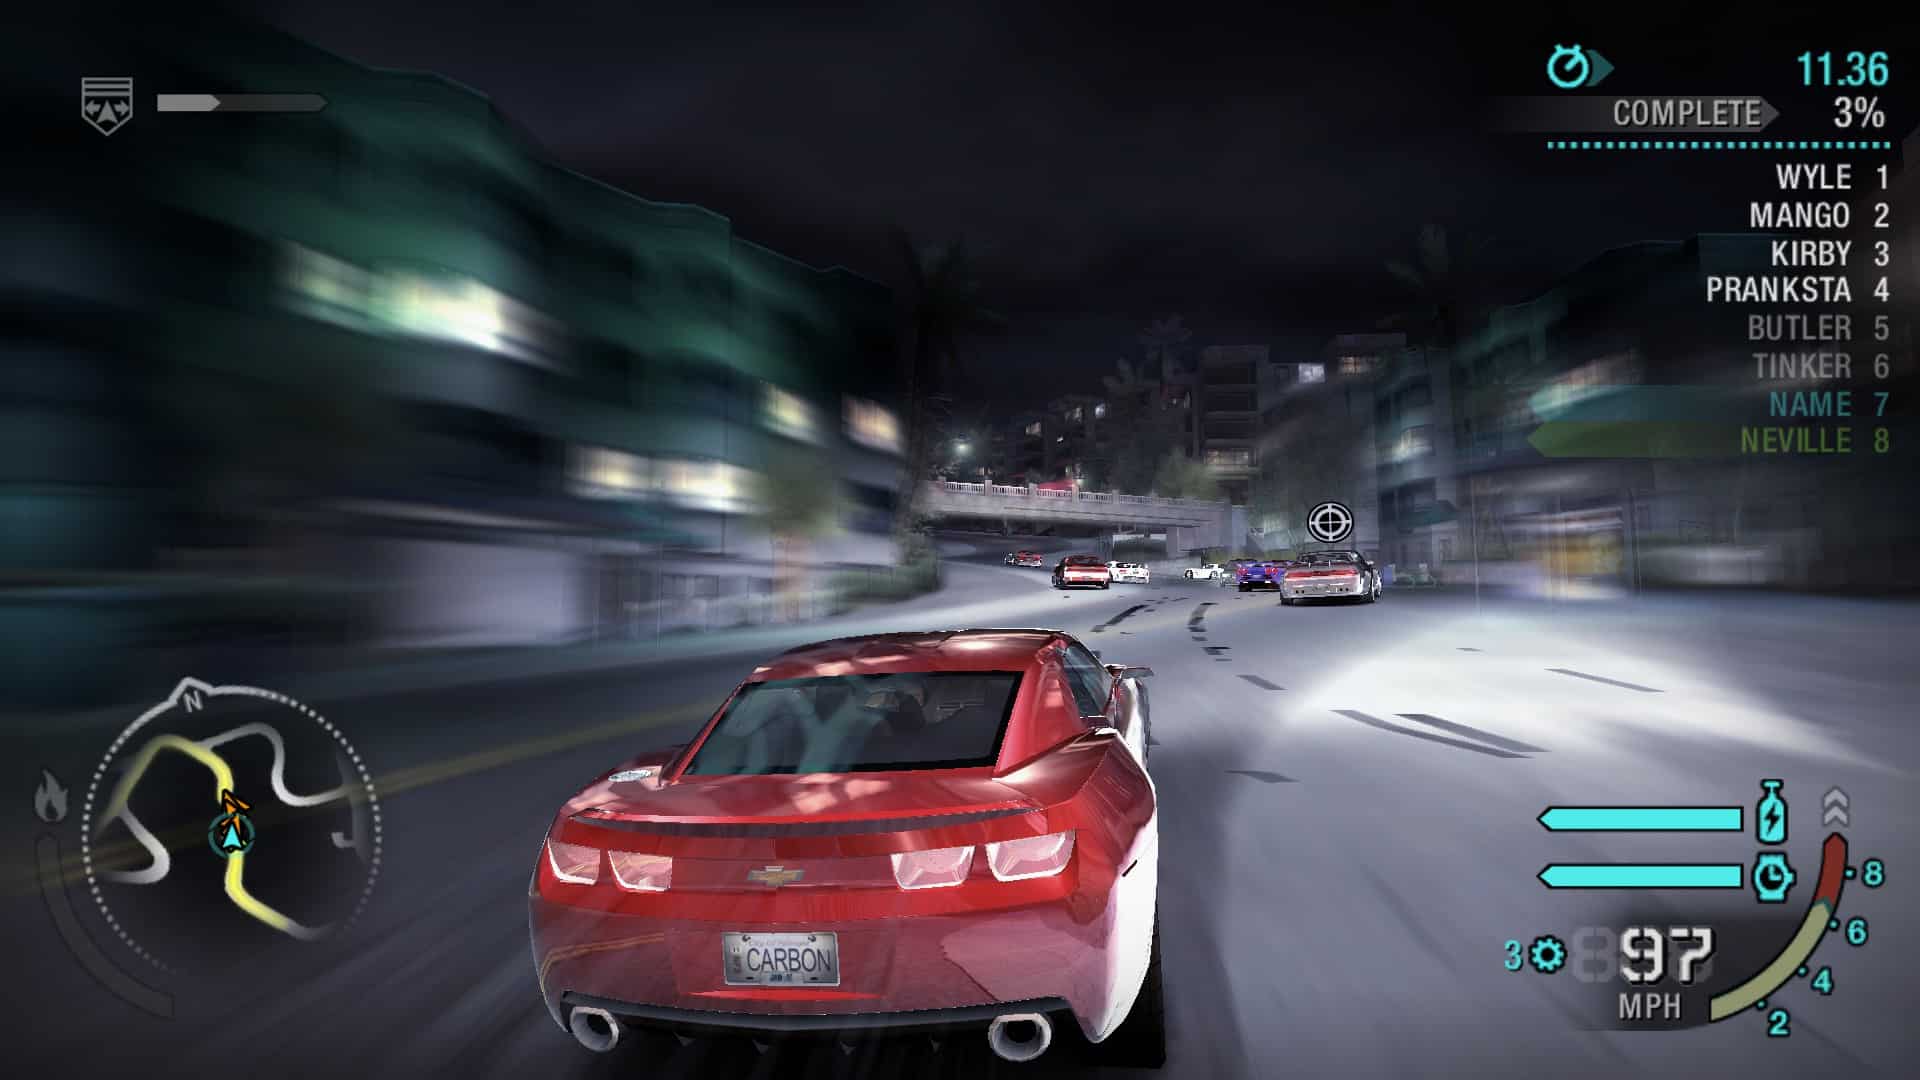 An in-game screenshot from Need for Speed Carbon.